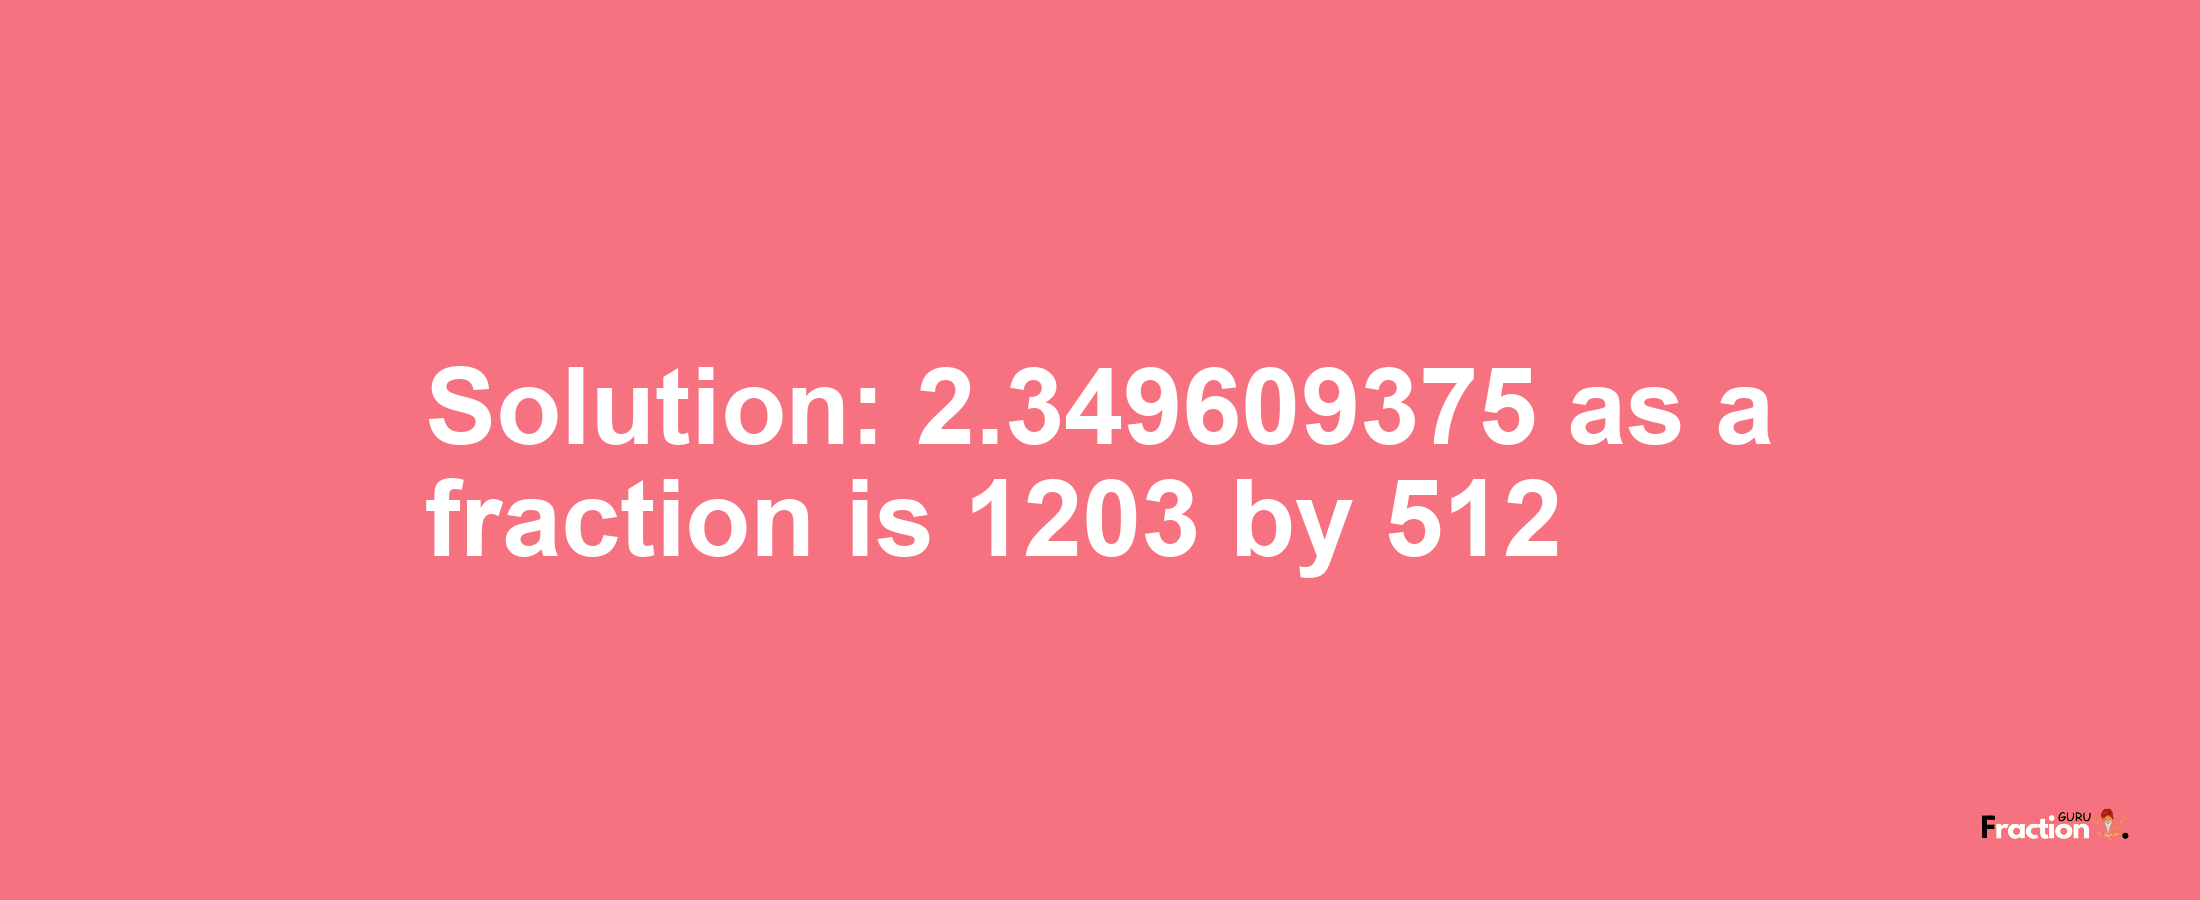 Solution:2.349609375 as a fraction is 1203/512